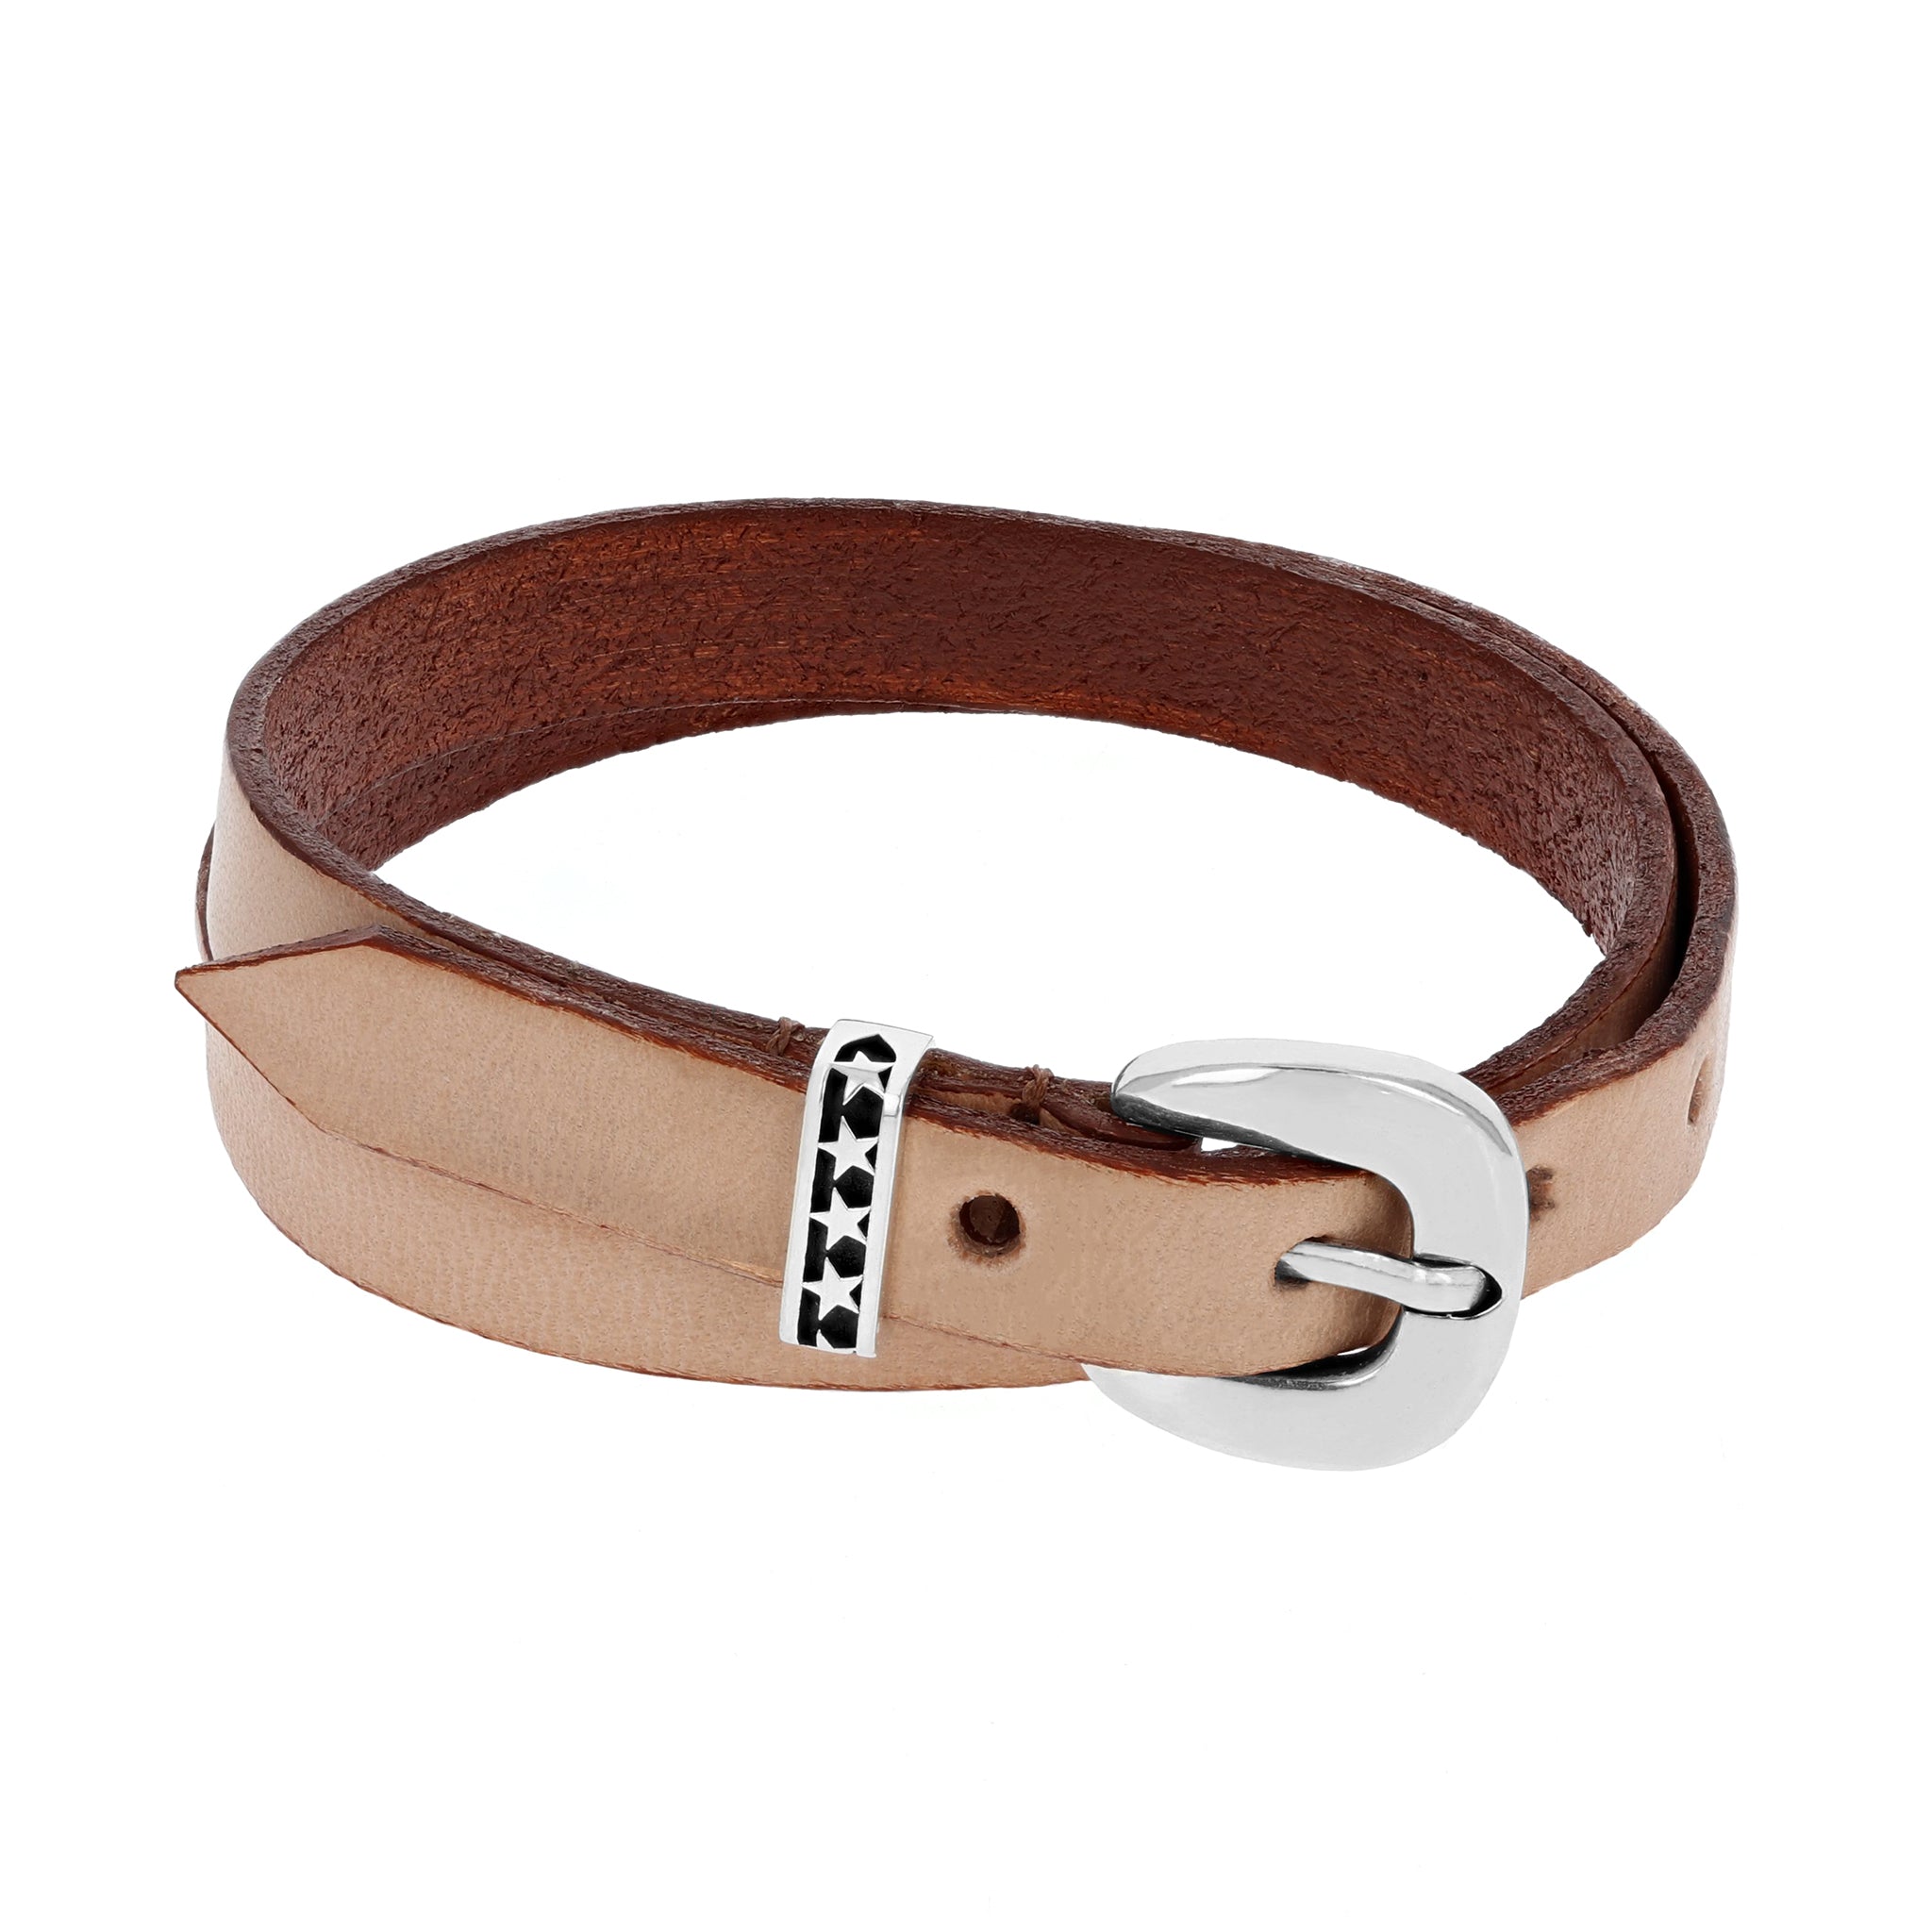 Brown Double Wrap Leather Bracelet with Silver Buckle and Stars on the Keeper